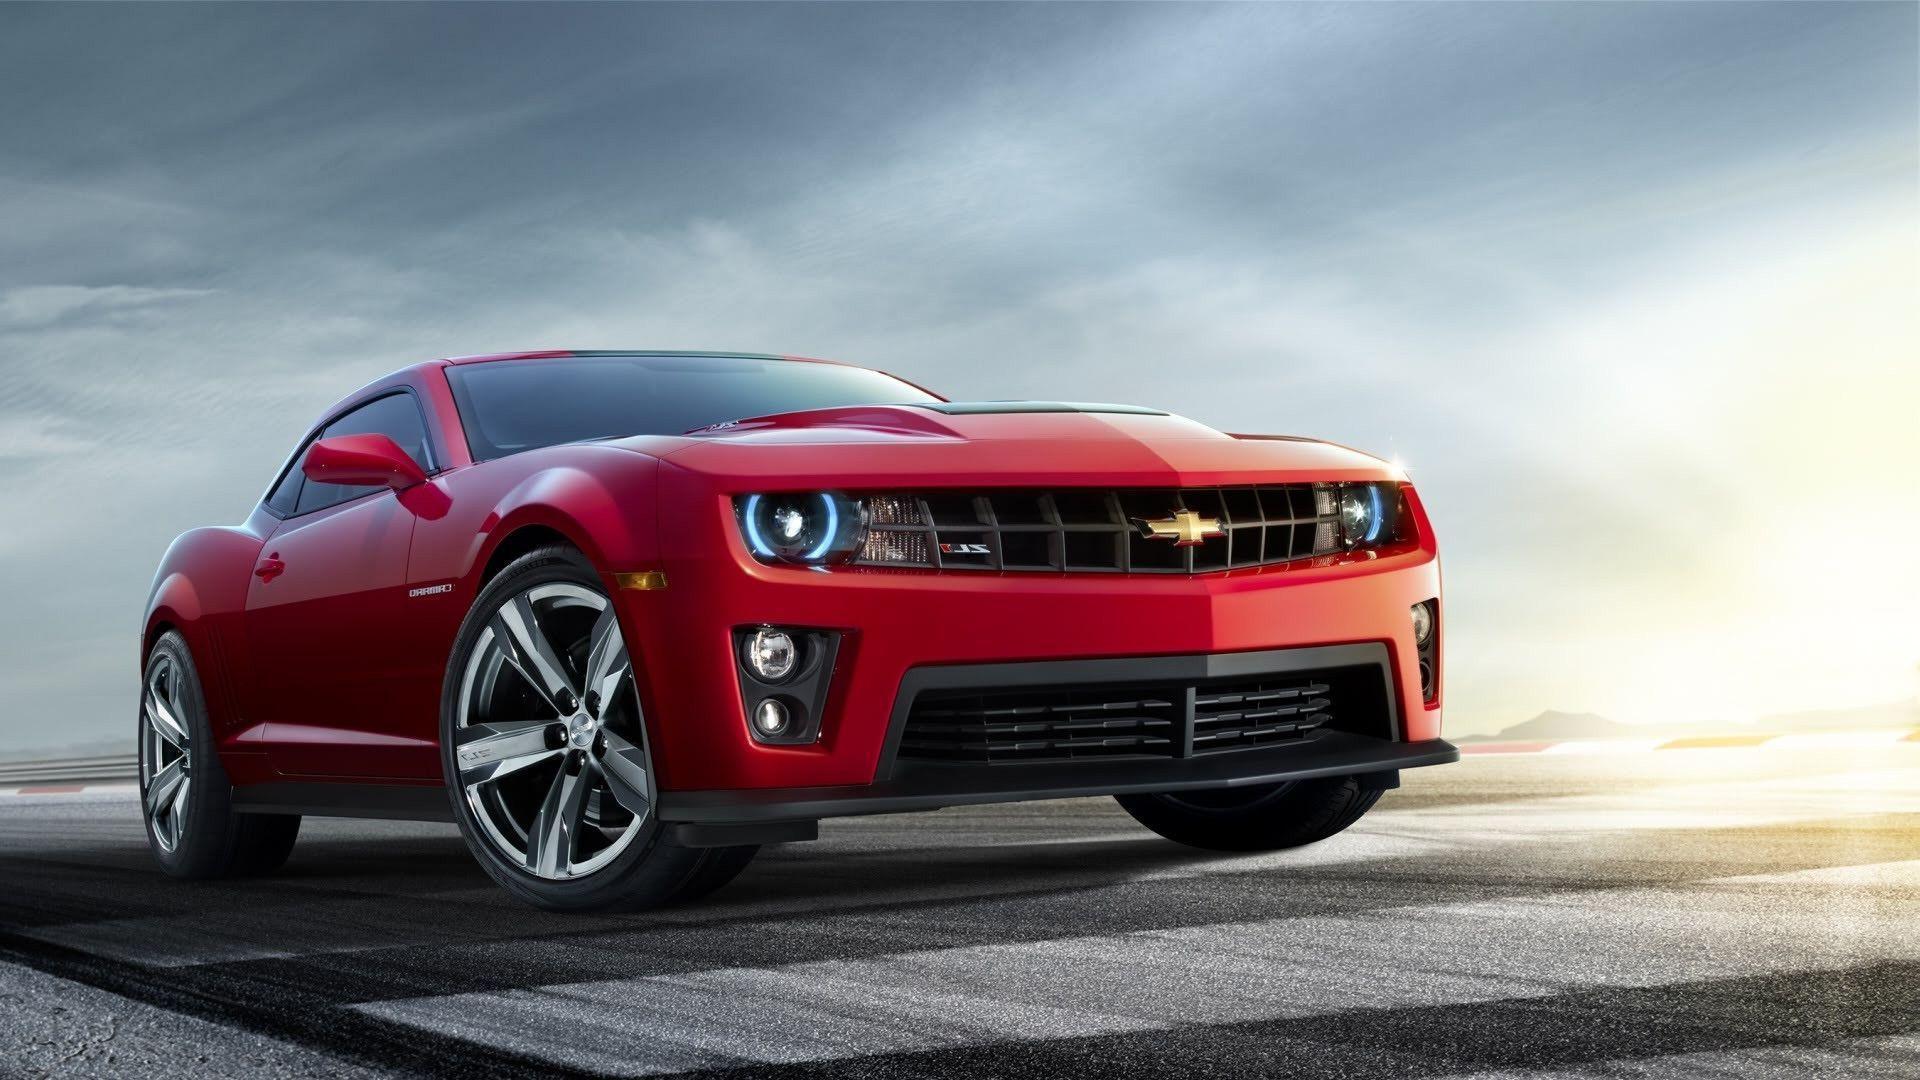 Chevrolet Sports Car Hd Wallpapers